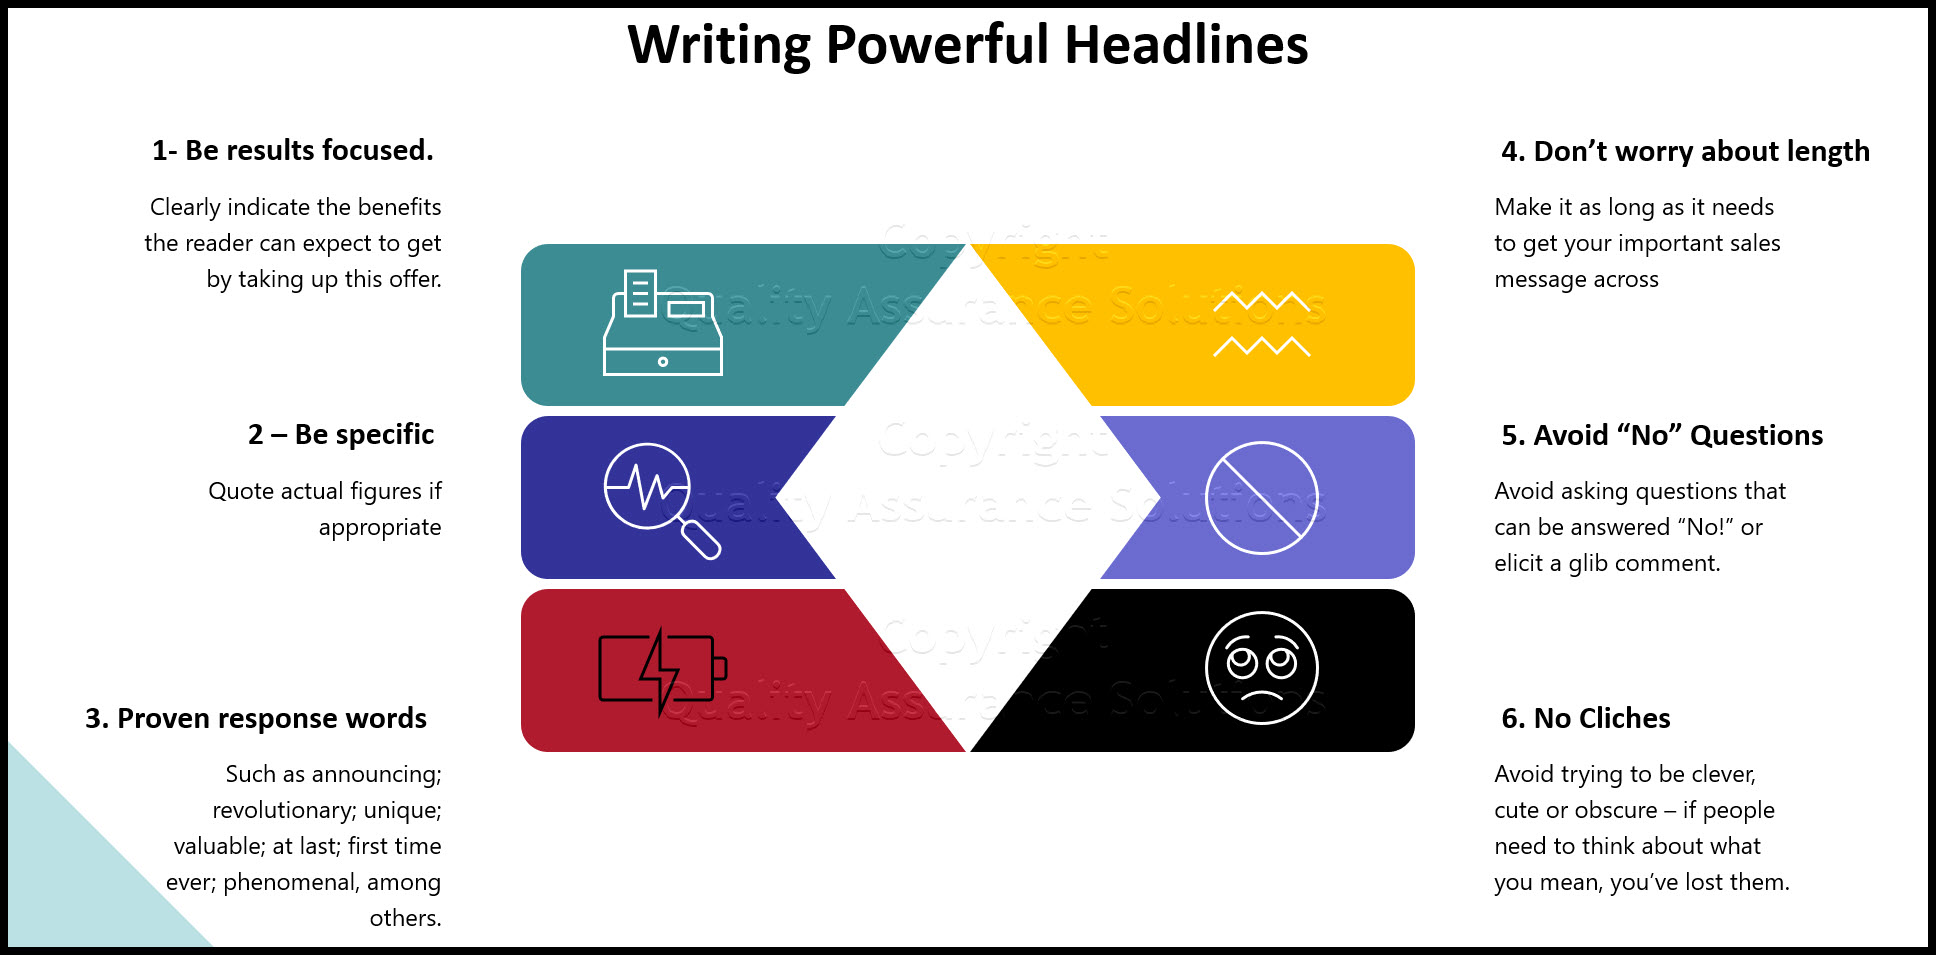 Writing powerful headlines with attention getting words. We teach you the easy process. Plus we include mutliple examples